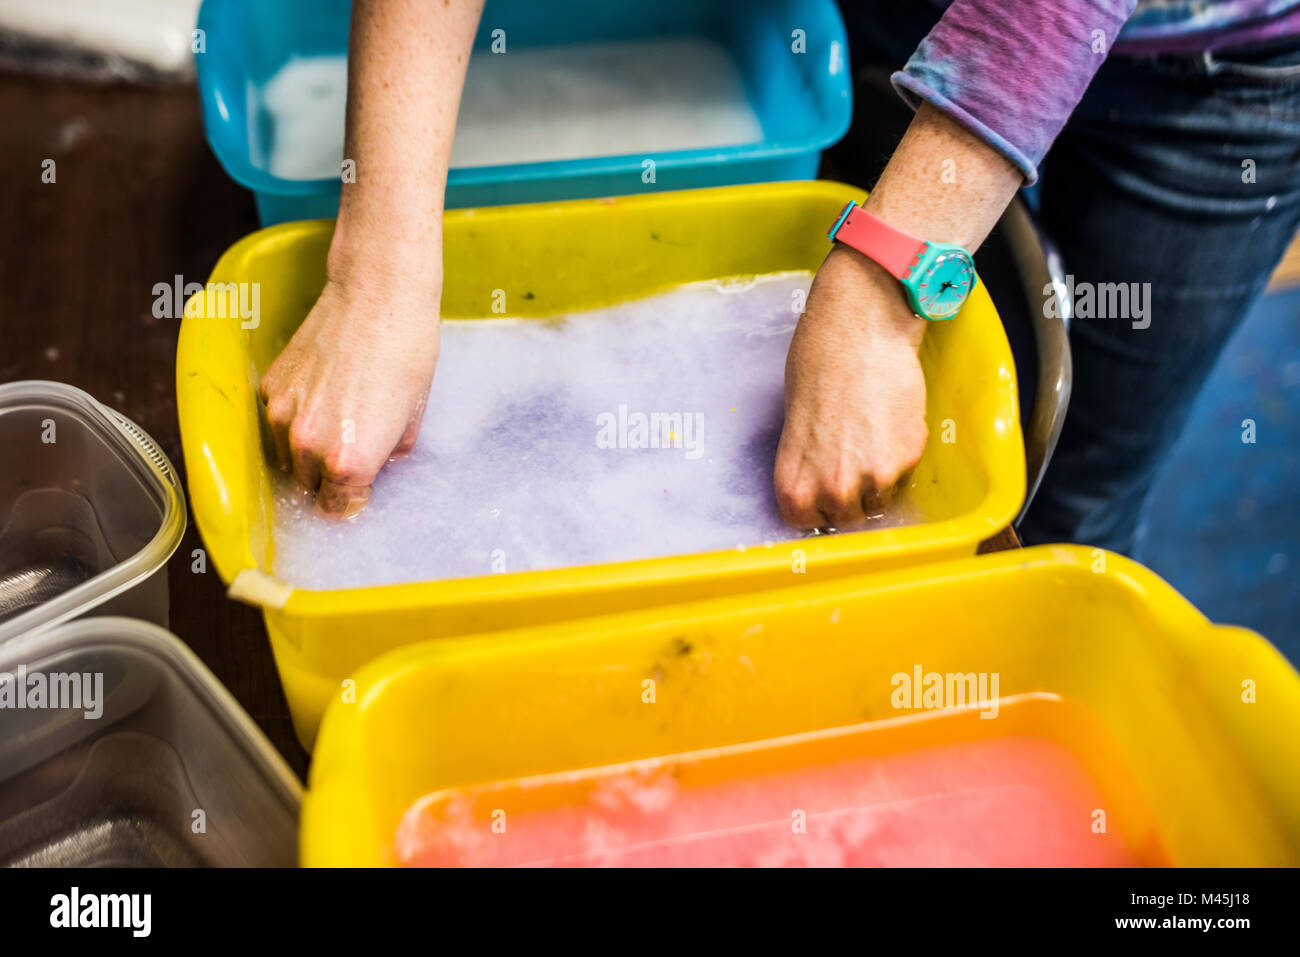 Paper making workshop in classroom. Stock Photo